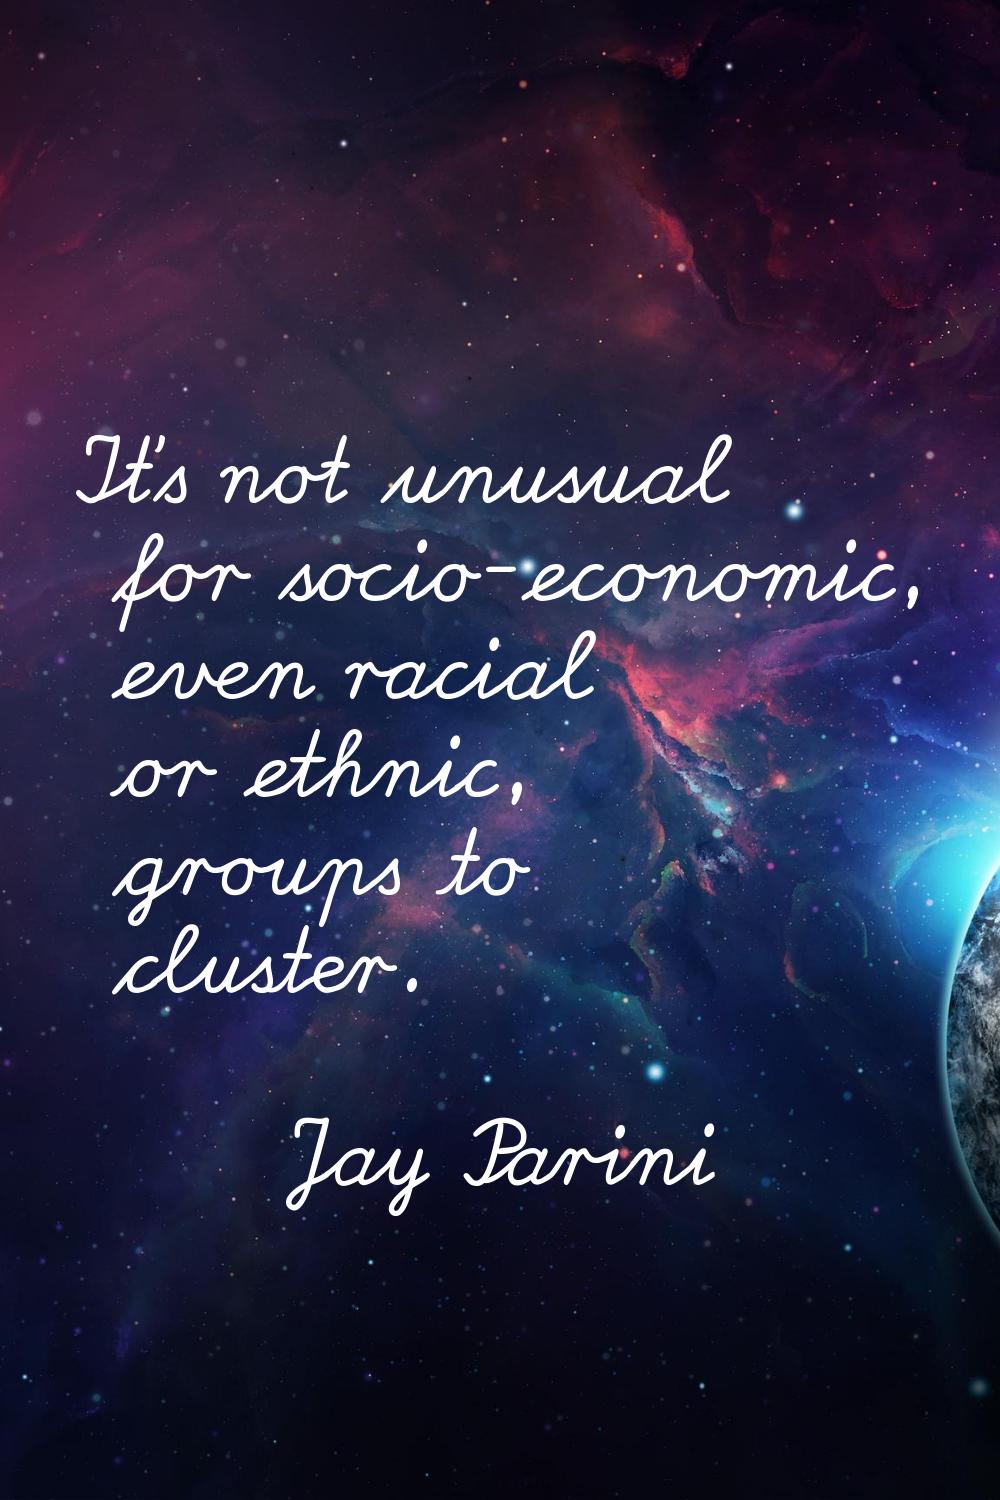 It's not unusual for socio-economic, even racial or ethnic, groups to cluster.